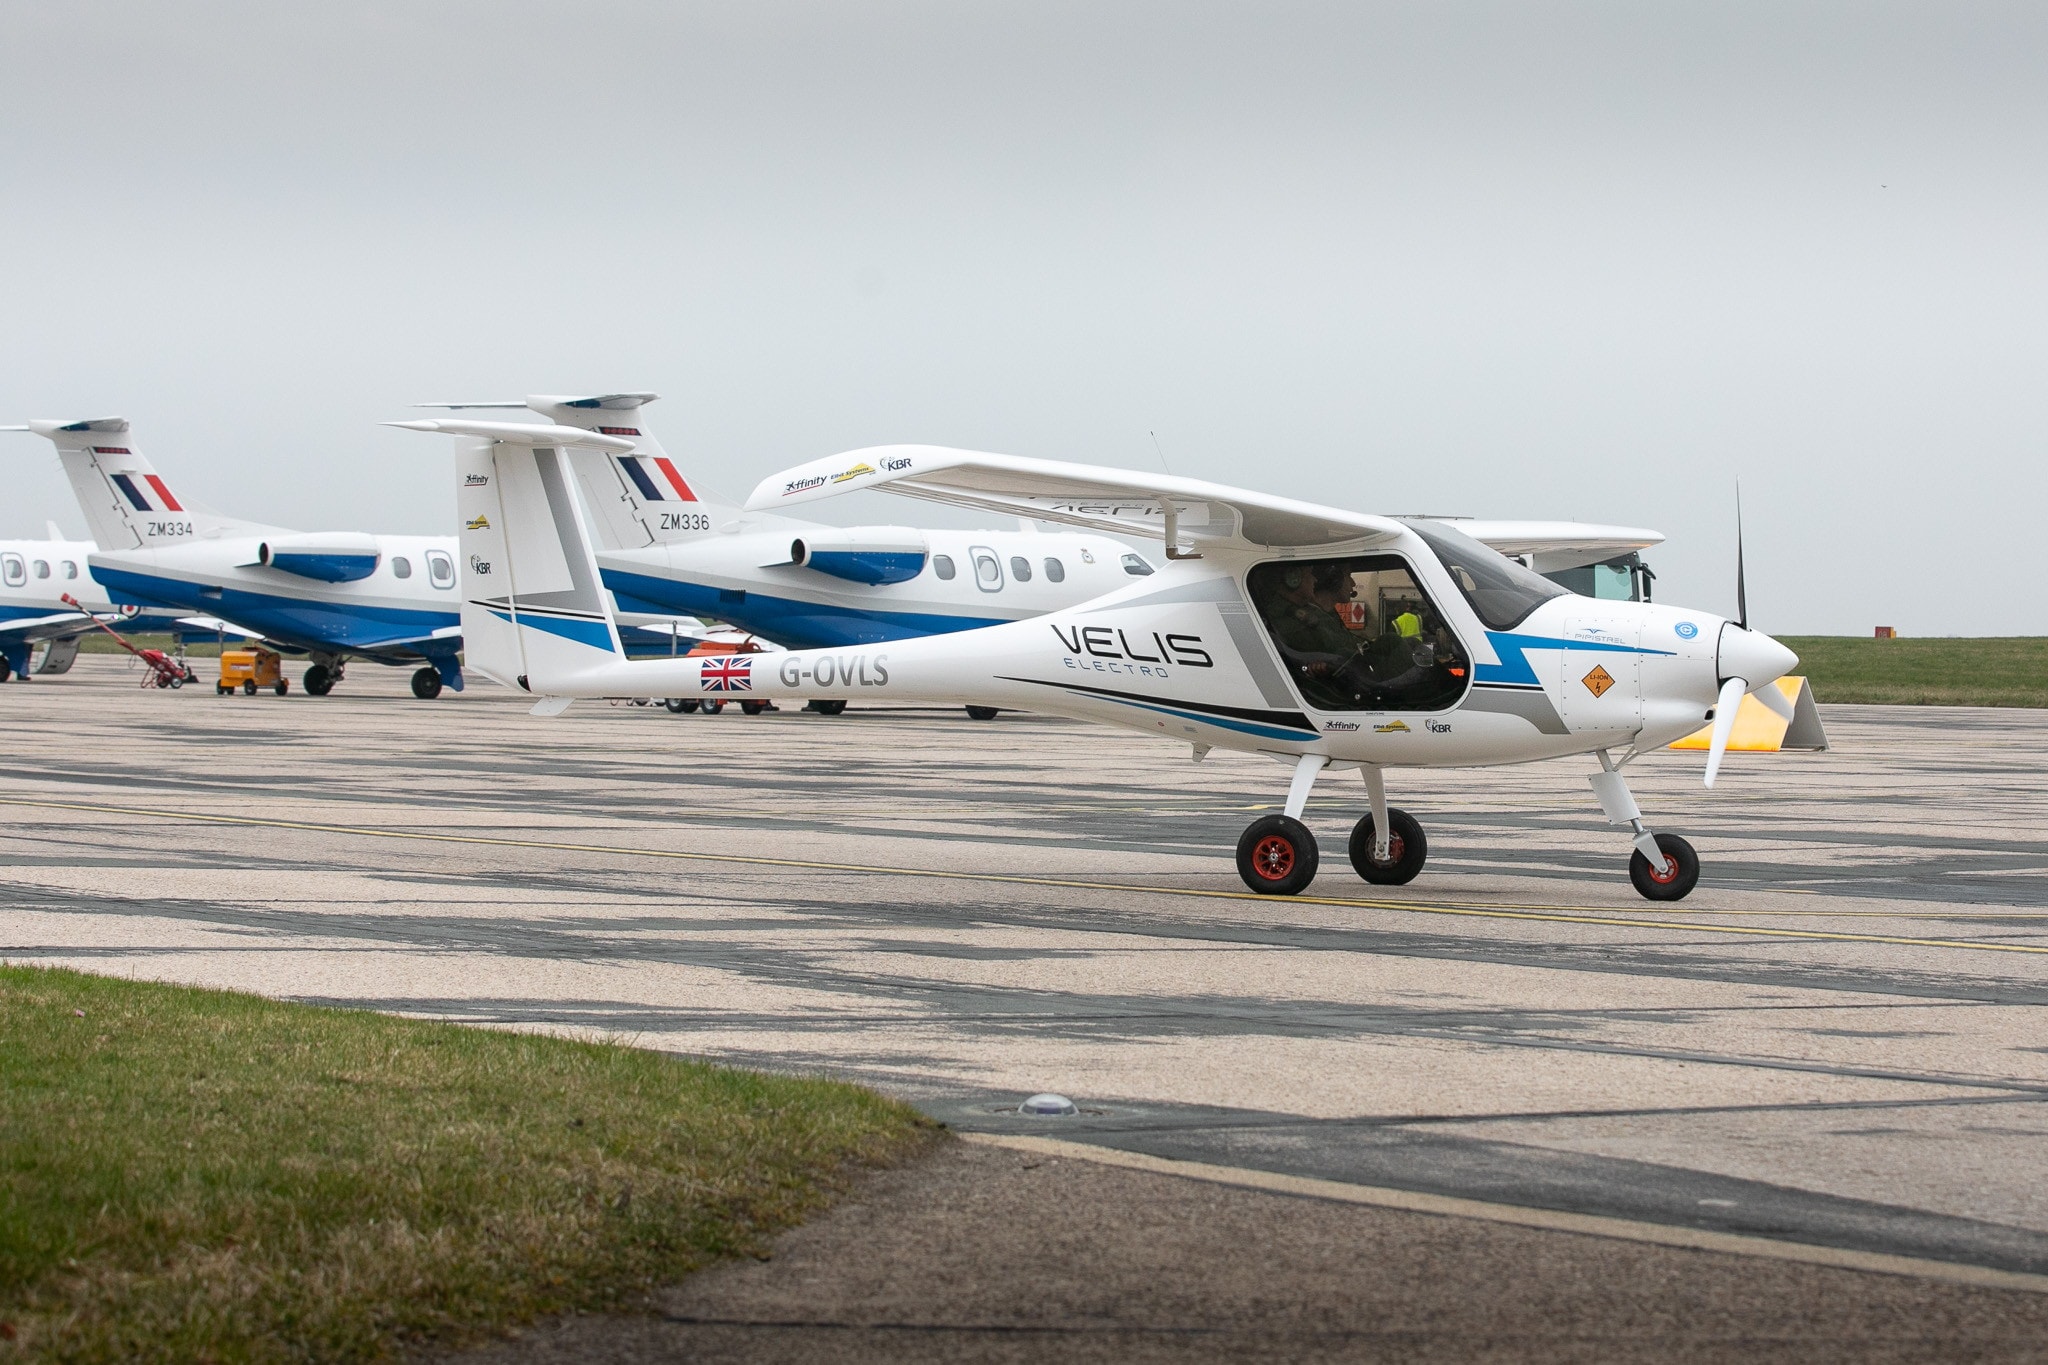 UK’s Royal Air Force Completes Successful Electric Aircraft Trials